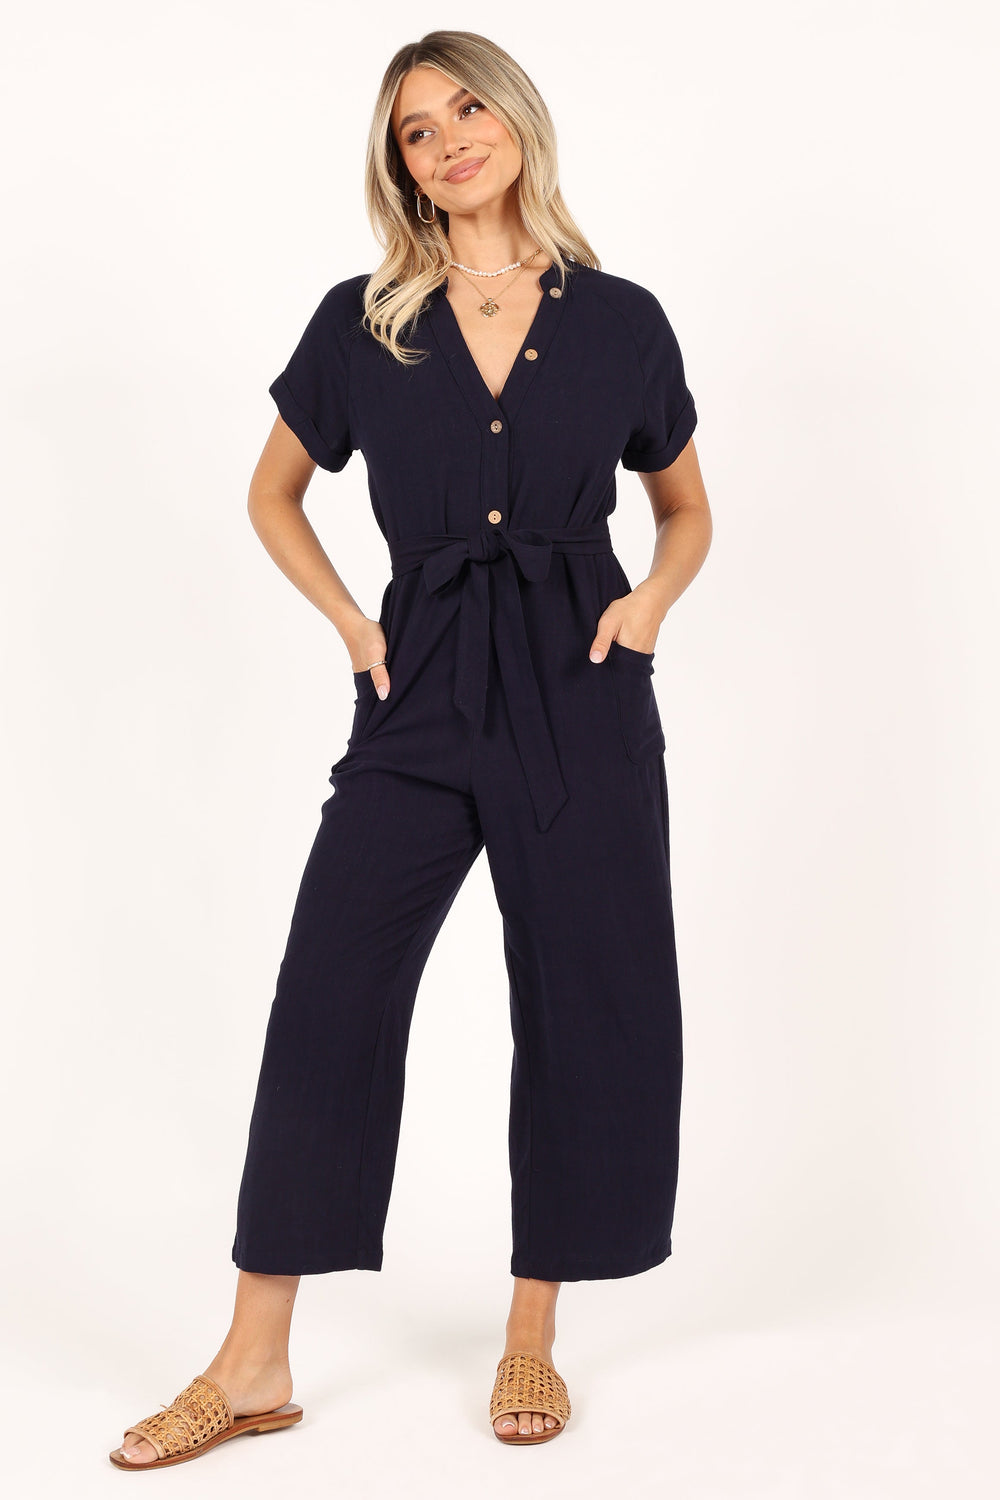 Petal and Pup USA Rompers Archie Jumpsuit - Navy